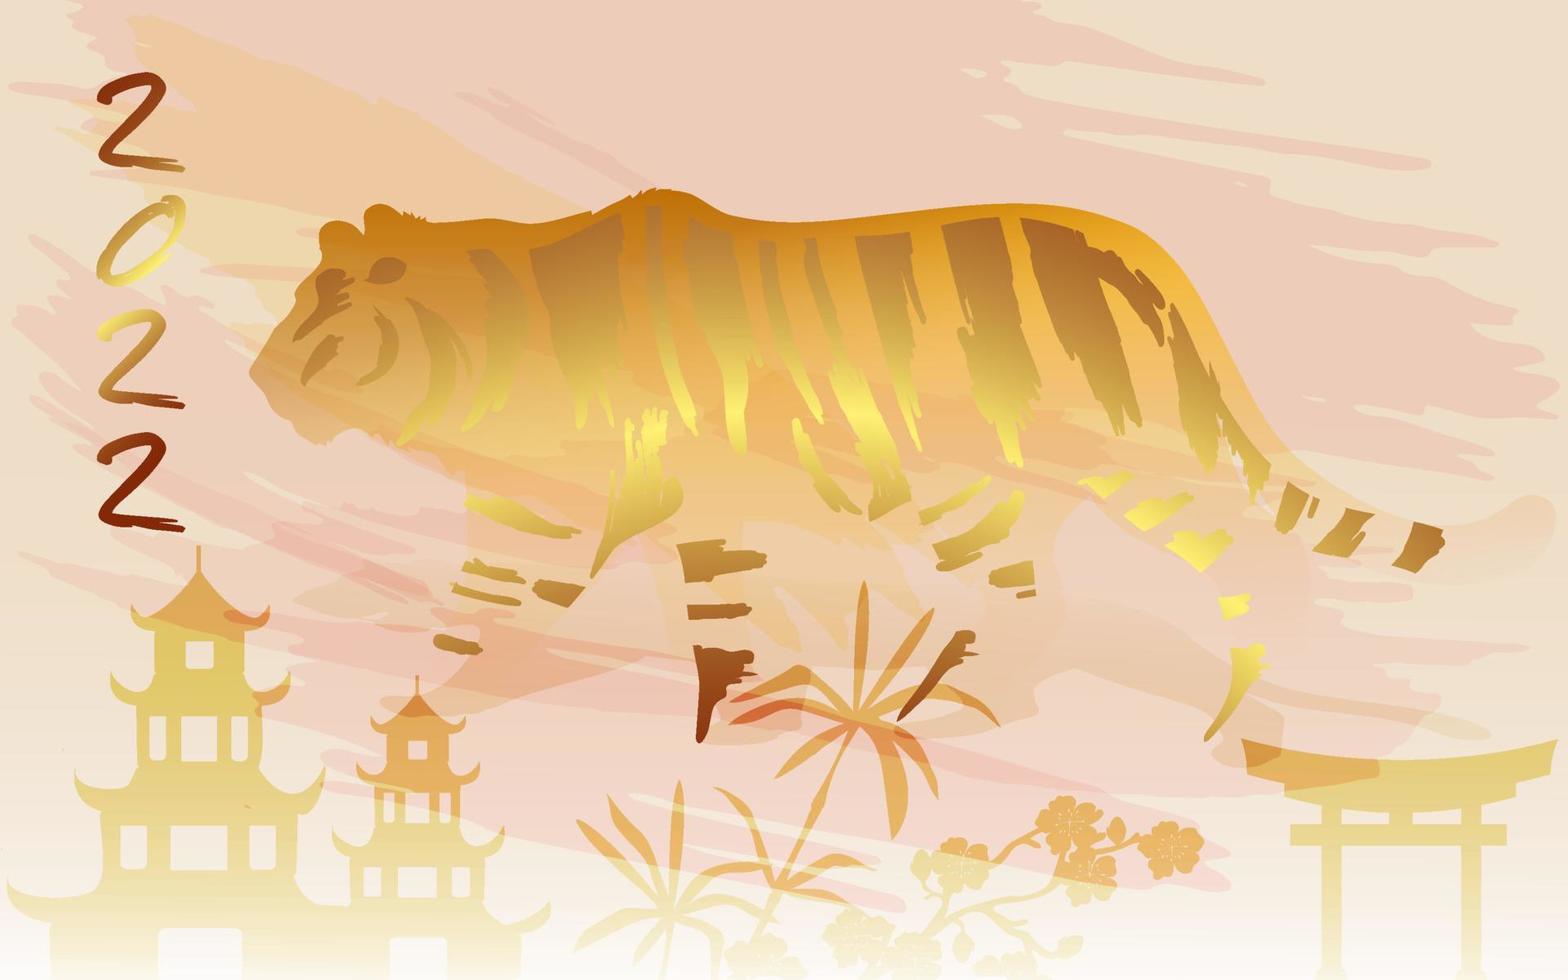 Silhouette of a tiger with gold stripes against the background of a Chinese pagoda, bamboo, sakura flowers. Happy Chinese New Year 2022. Symbol of the year 2022. vector